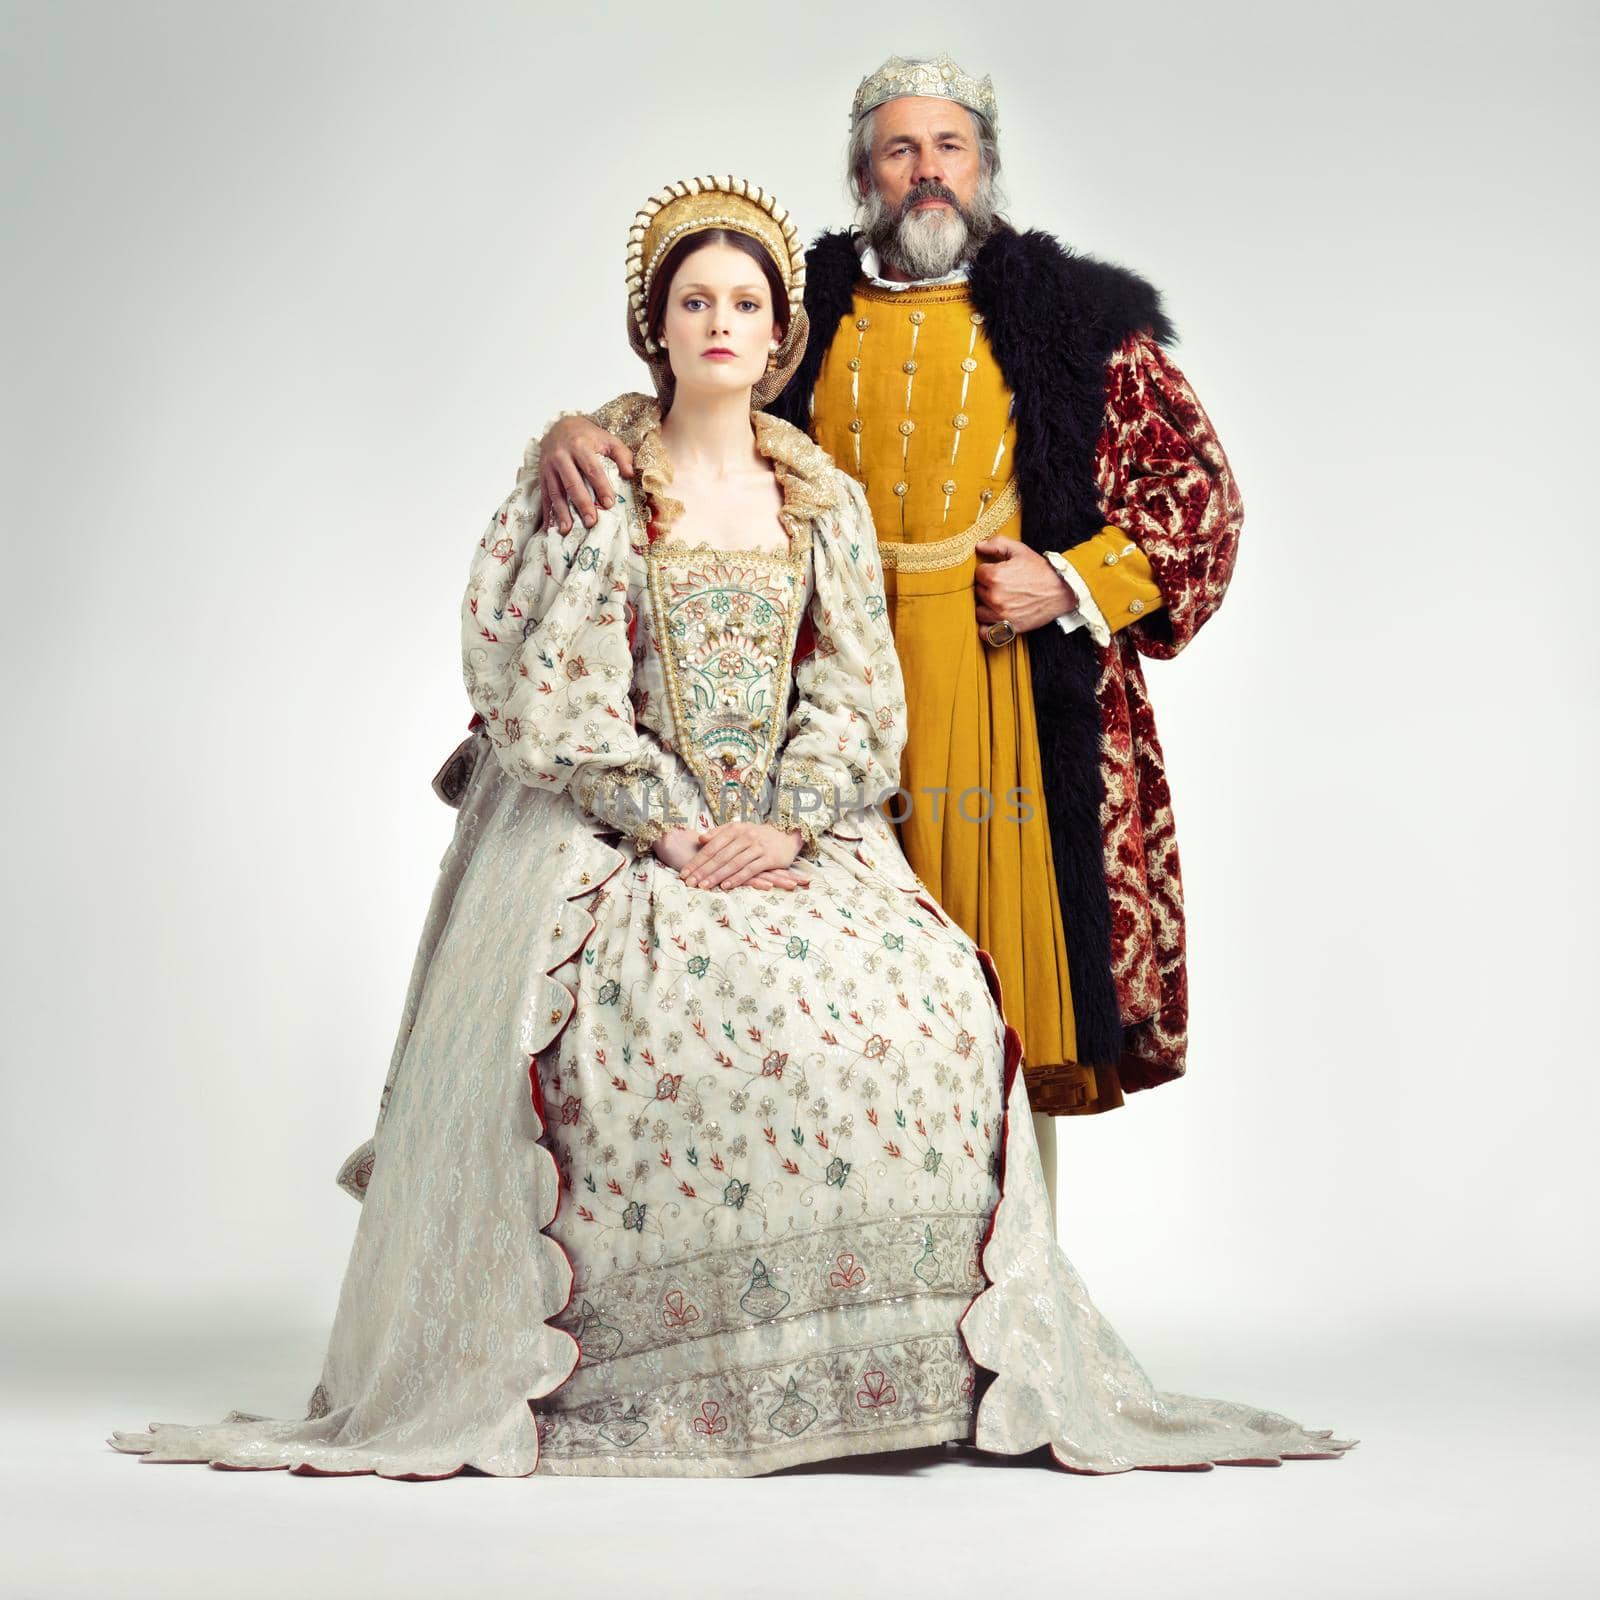 The Royals. Studio shot of a regal king and queen. by YuriArcurs